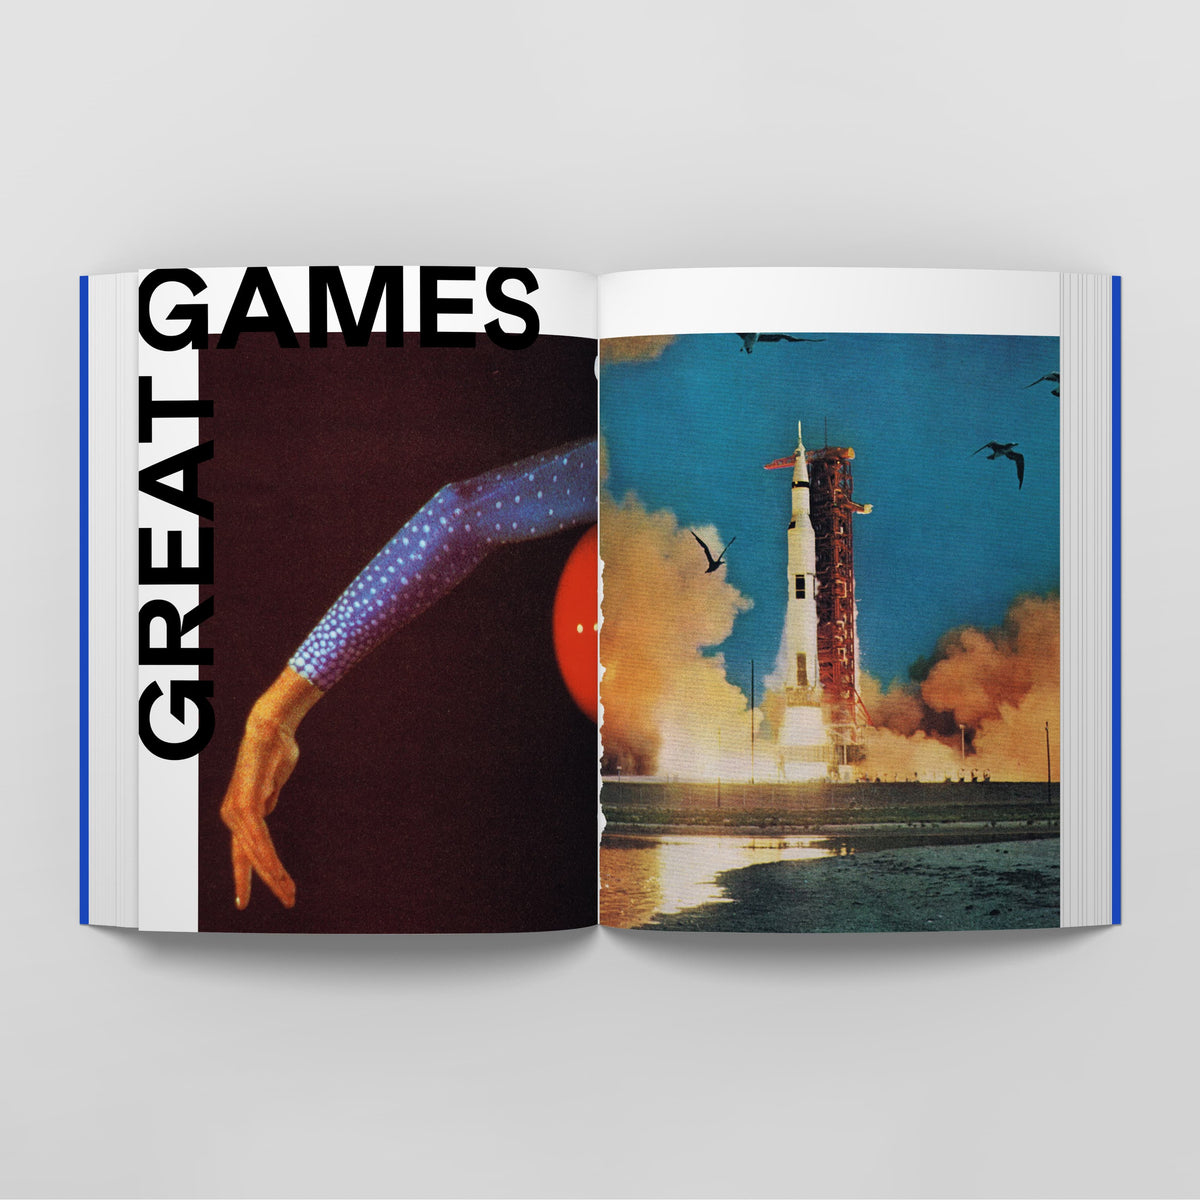 An open book displays a rocket launching on the right page and a close-up of an arm on the left page, evoking themes of Central Asia's space endeavors. The words "Punk Orientalism: The Art of Rebellion" by Black Dog Online are printed across both pages.